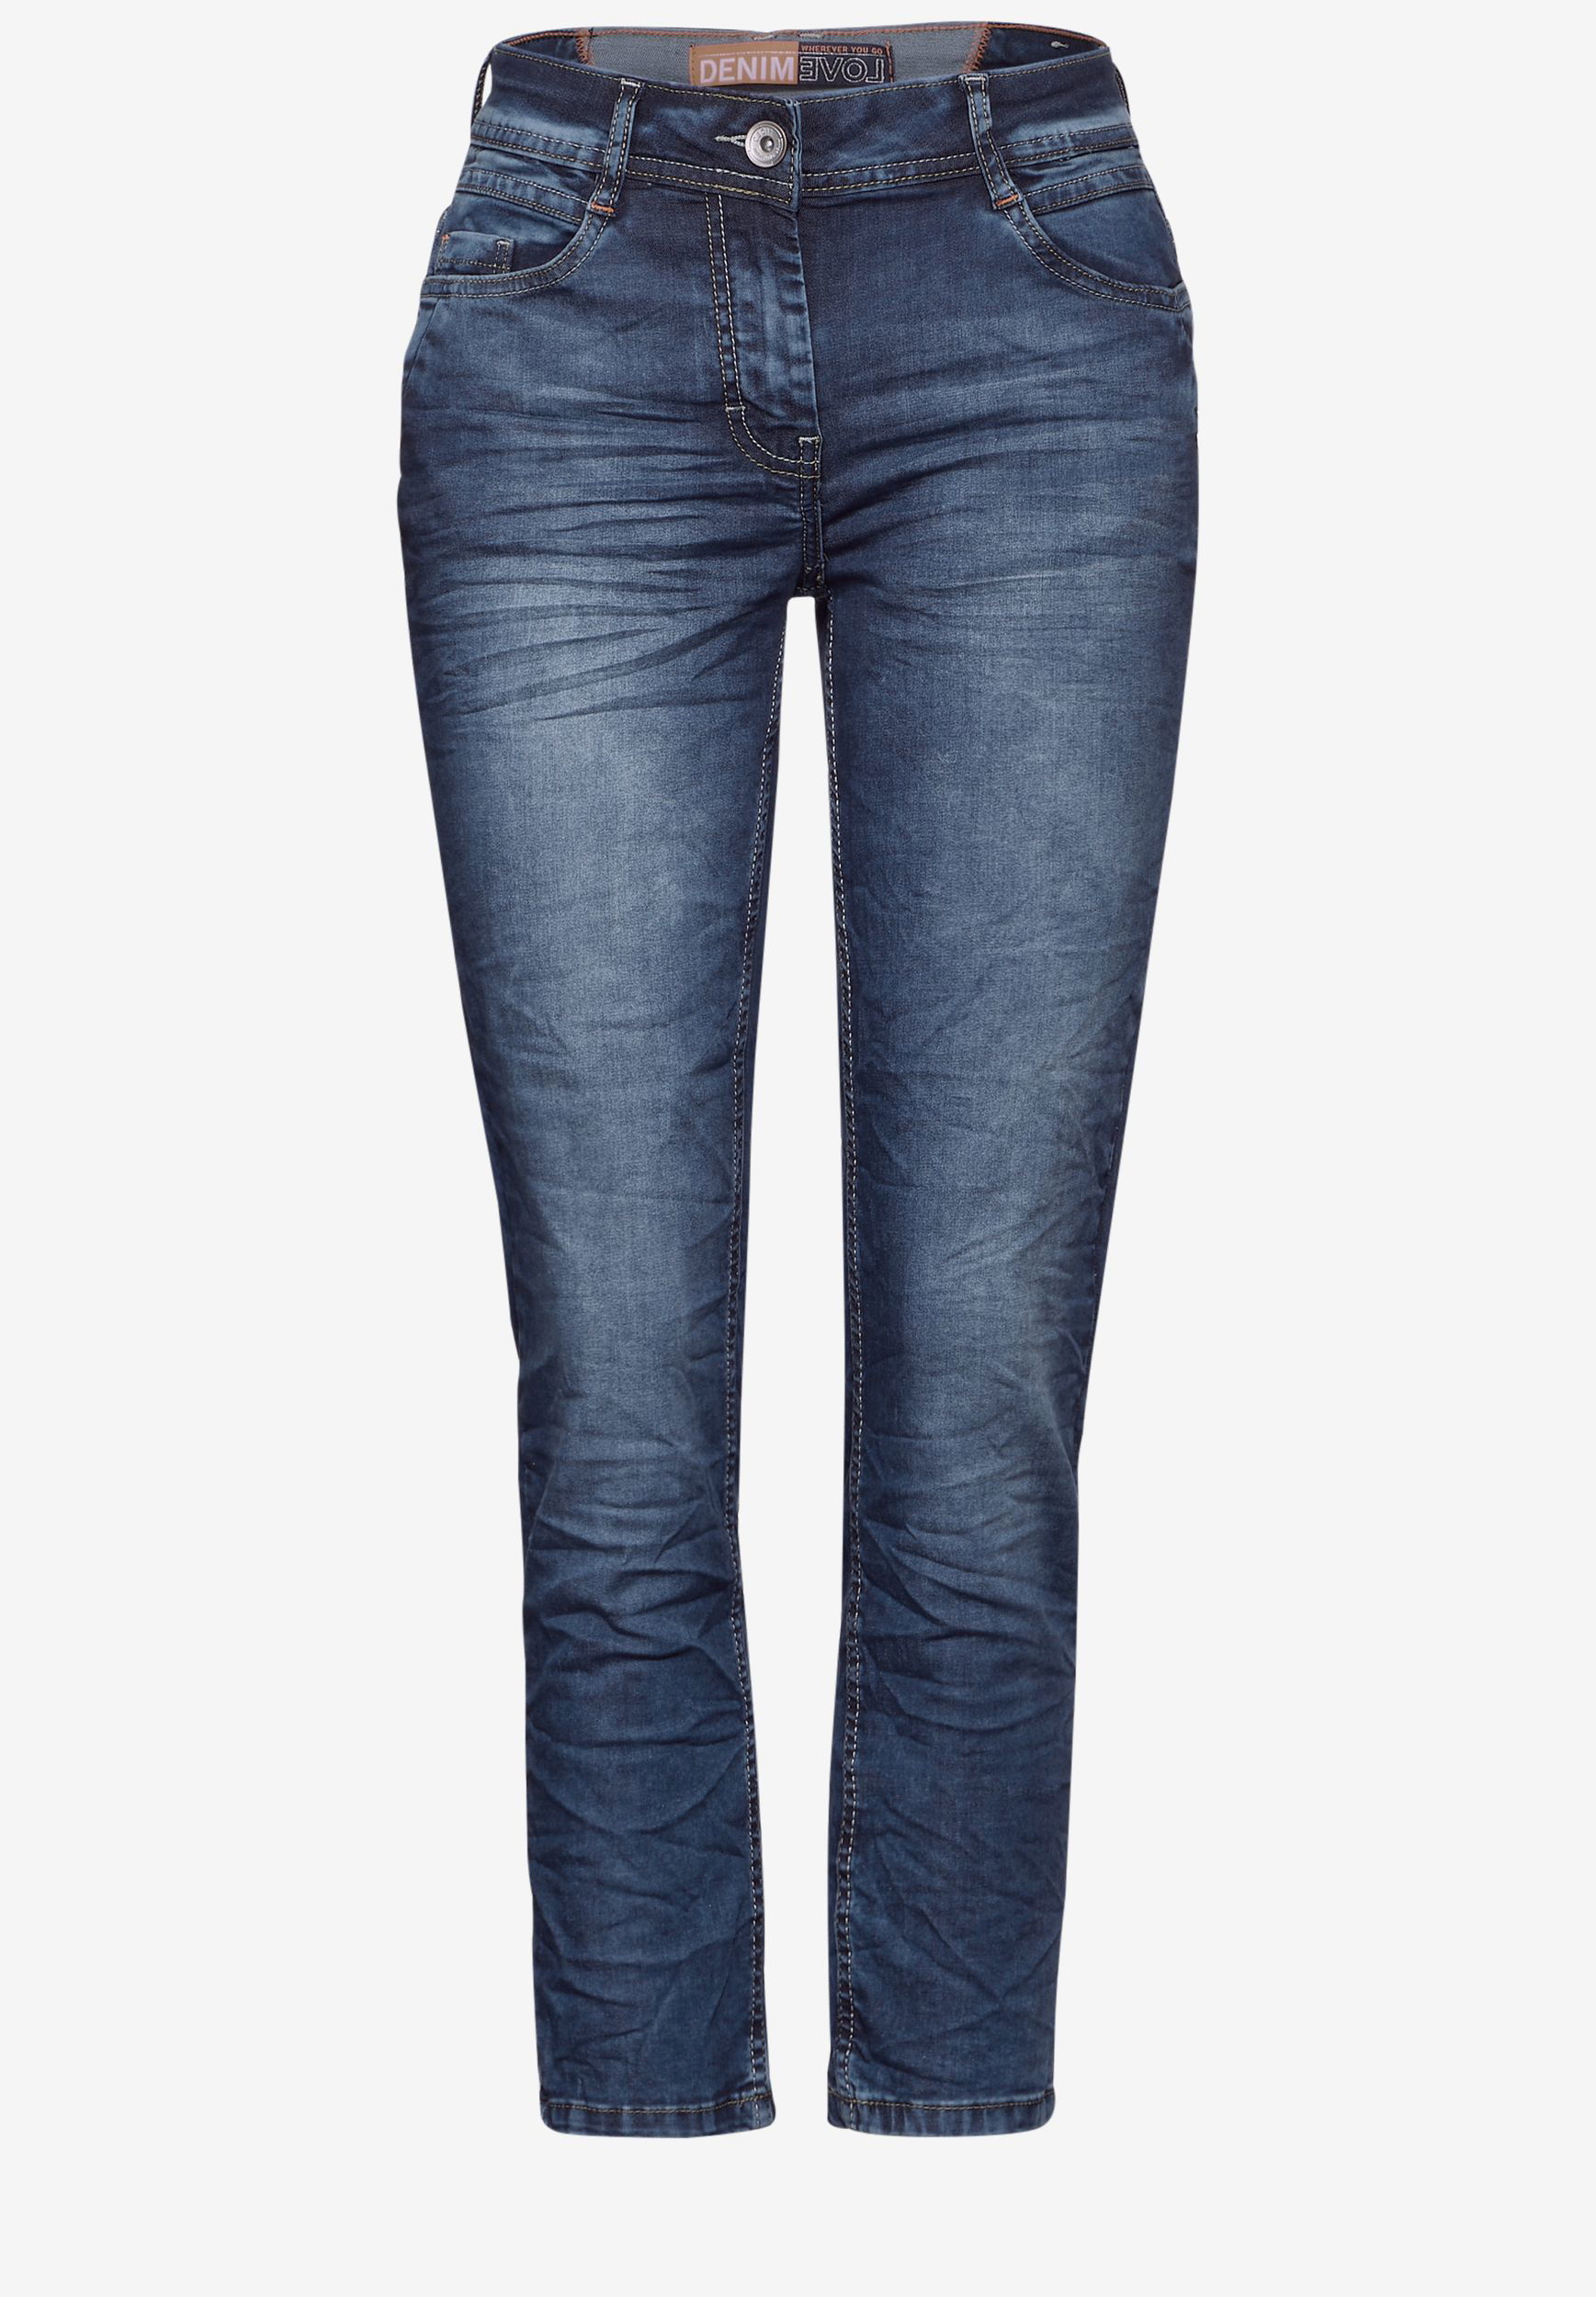 CECIL |  CECIL 7/8-Jeans  | 33/26 | mid blue used wash